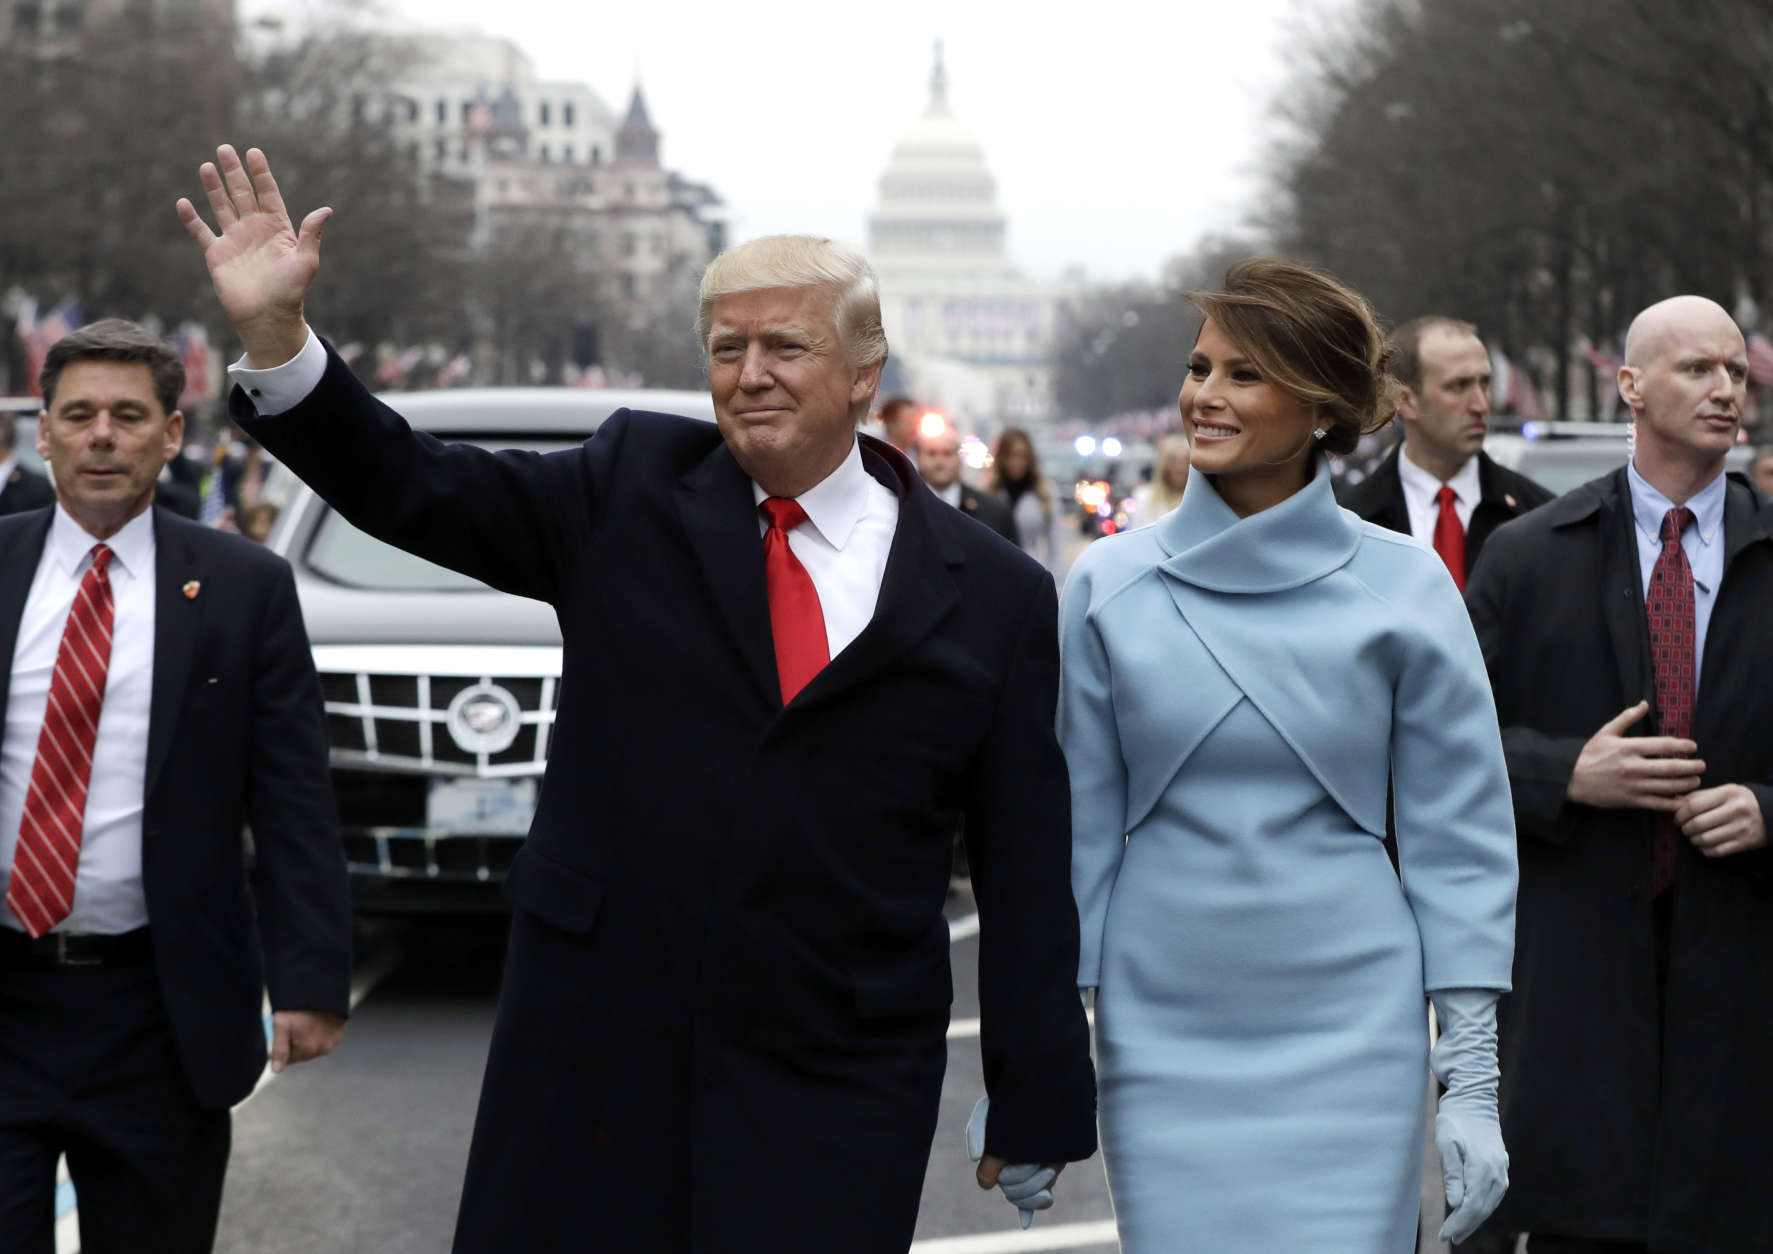 WASHINGTON, DC - JANUARY 20:  U.S. President Donald Trump waves to supporters as he walks the parade route with first lady Melania Trump after being sworn in at the 58th Presidential Inauguration January 20, 2017 in Washington, D.C. Donald J. Trump was sworn in today as the 45th president of the United States  (Photo by Evan Vucci - Pool/Getty Images)